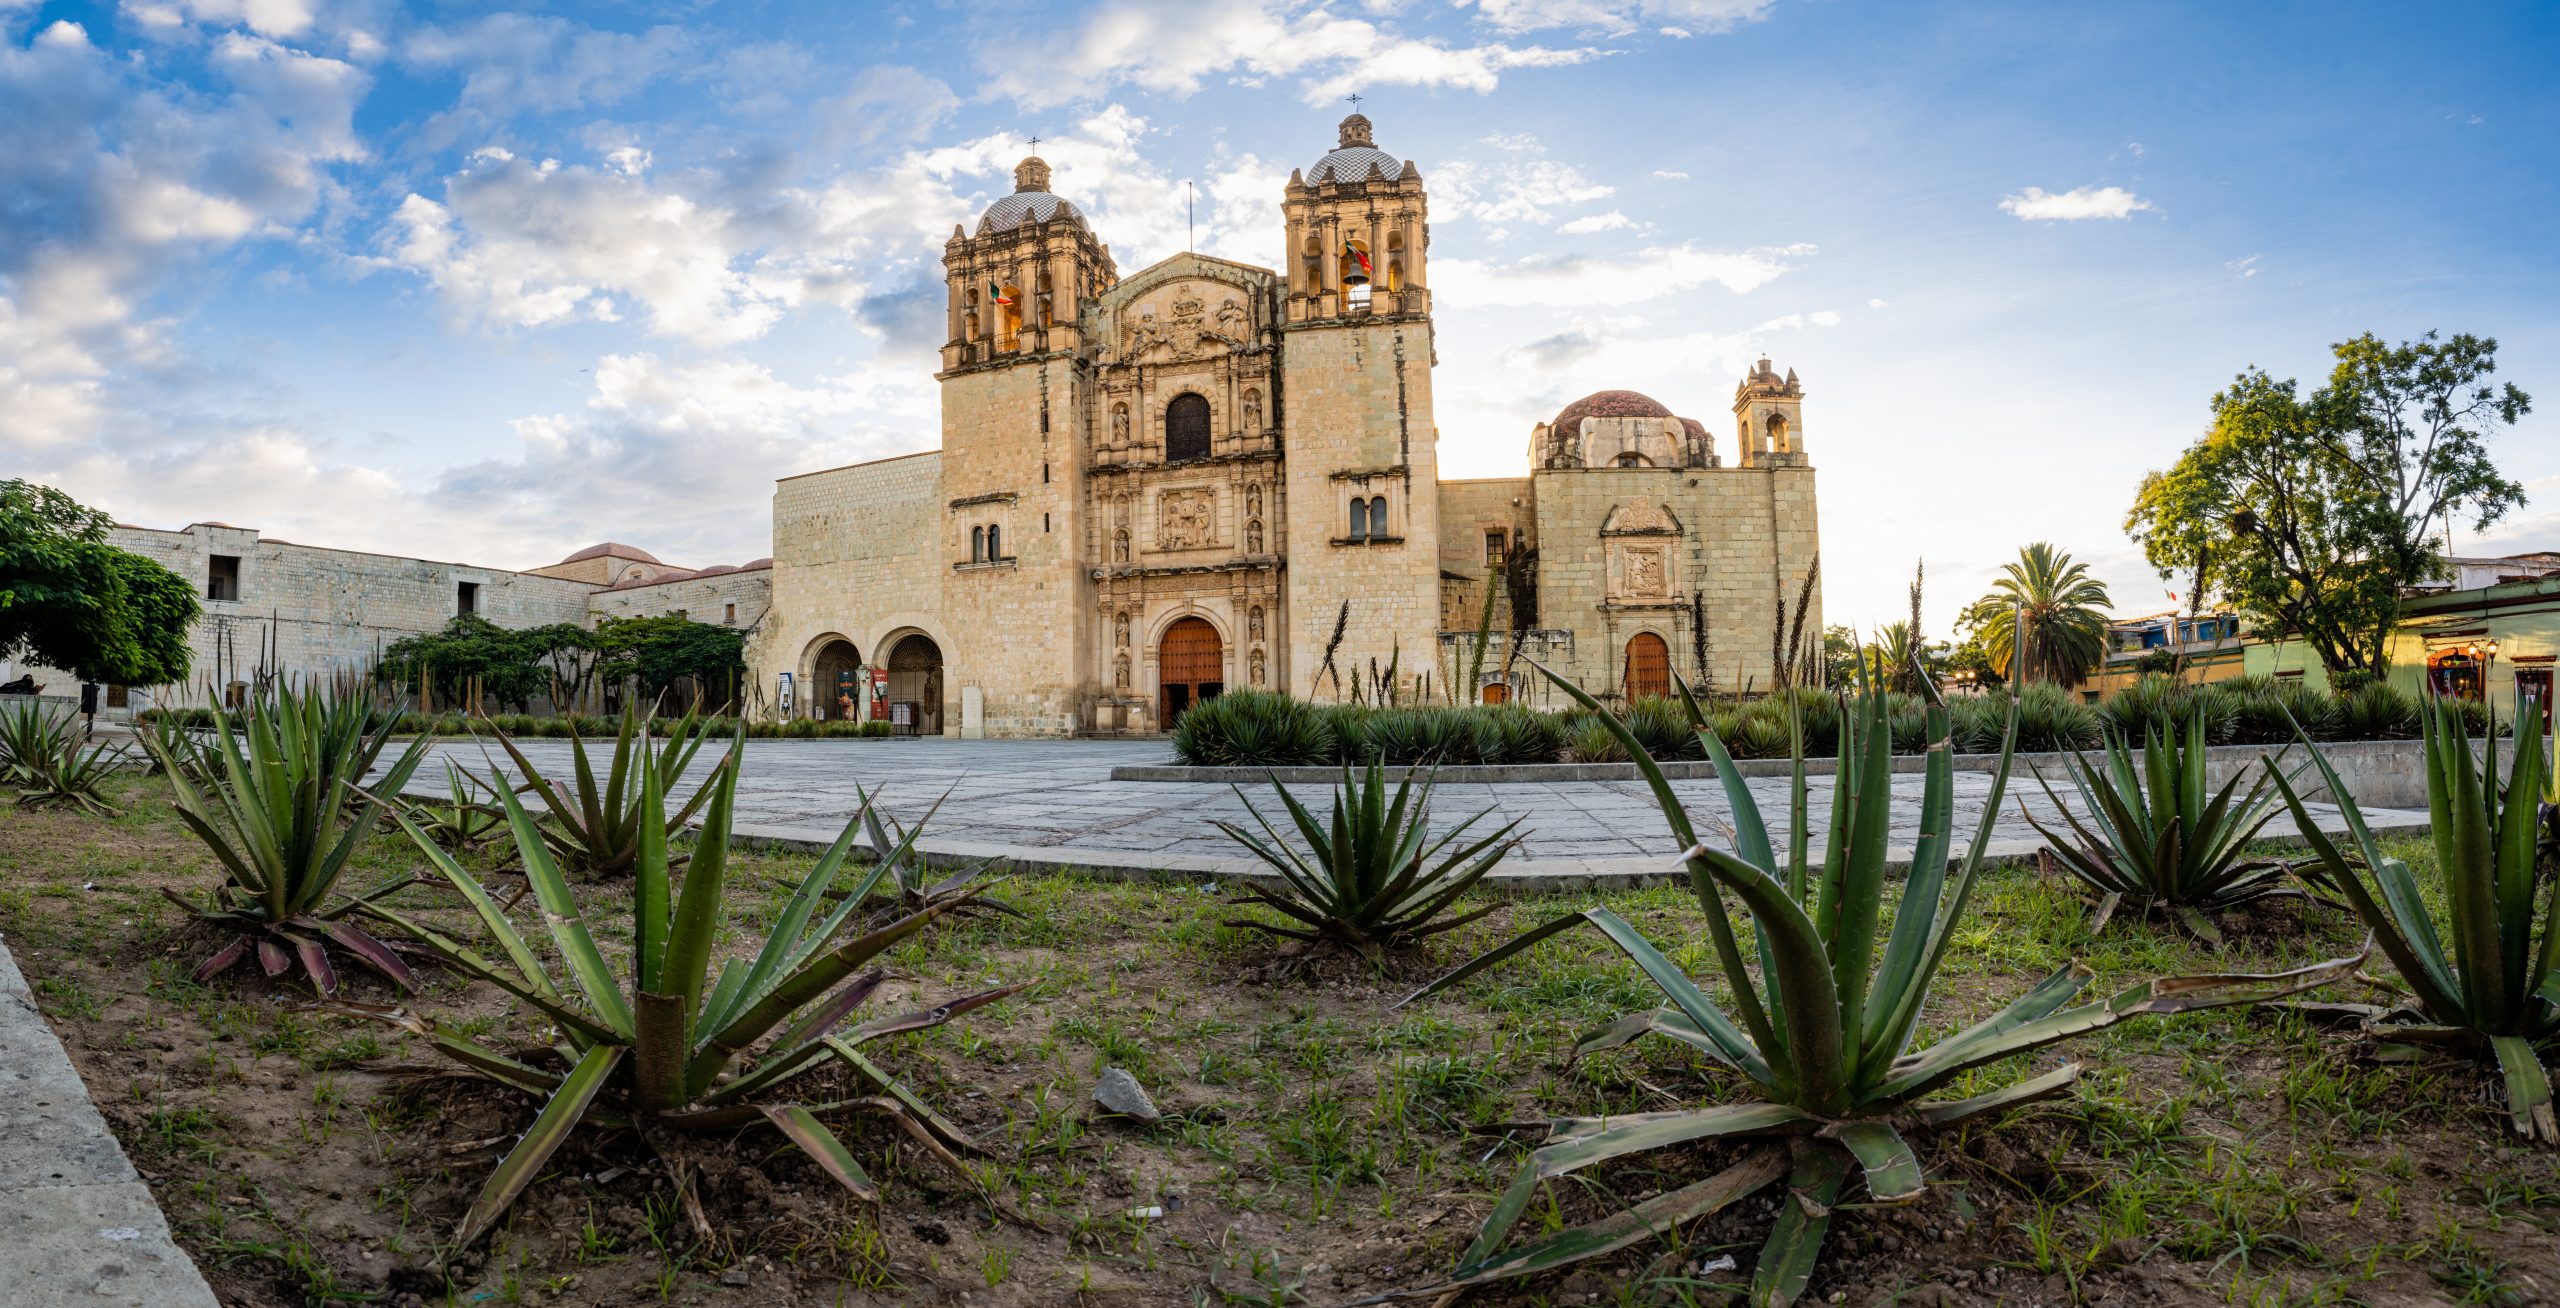 A breathtaking panoramic photograph of Santo Domingo Church and Convent in Oaxaca, taken from a low angle among the agave plants in front of the atrium. The morning sun shines brilliantly behind the church, casting a warm and divine glow over the scene. This striking image captures the beauty, history, and spirituality of the church and convent, making it a perfect addition to any collection of Oaxacan or religious photography.